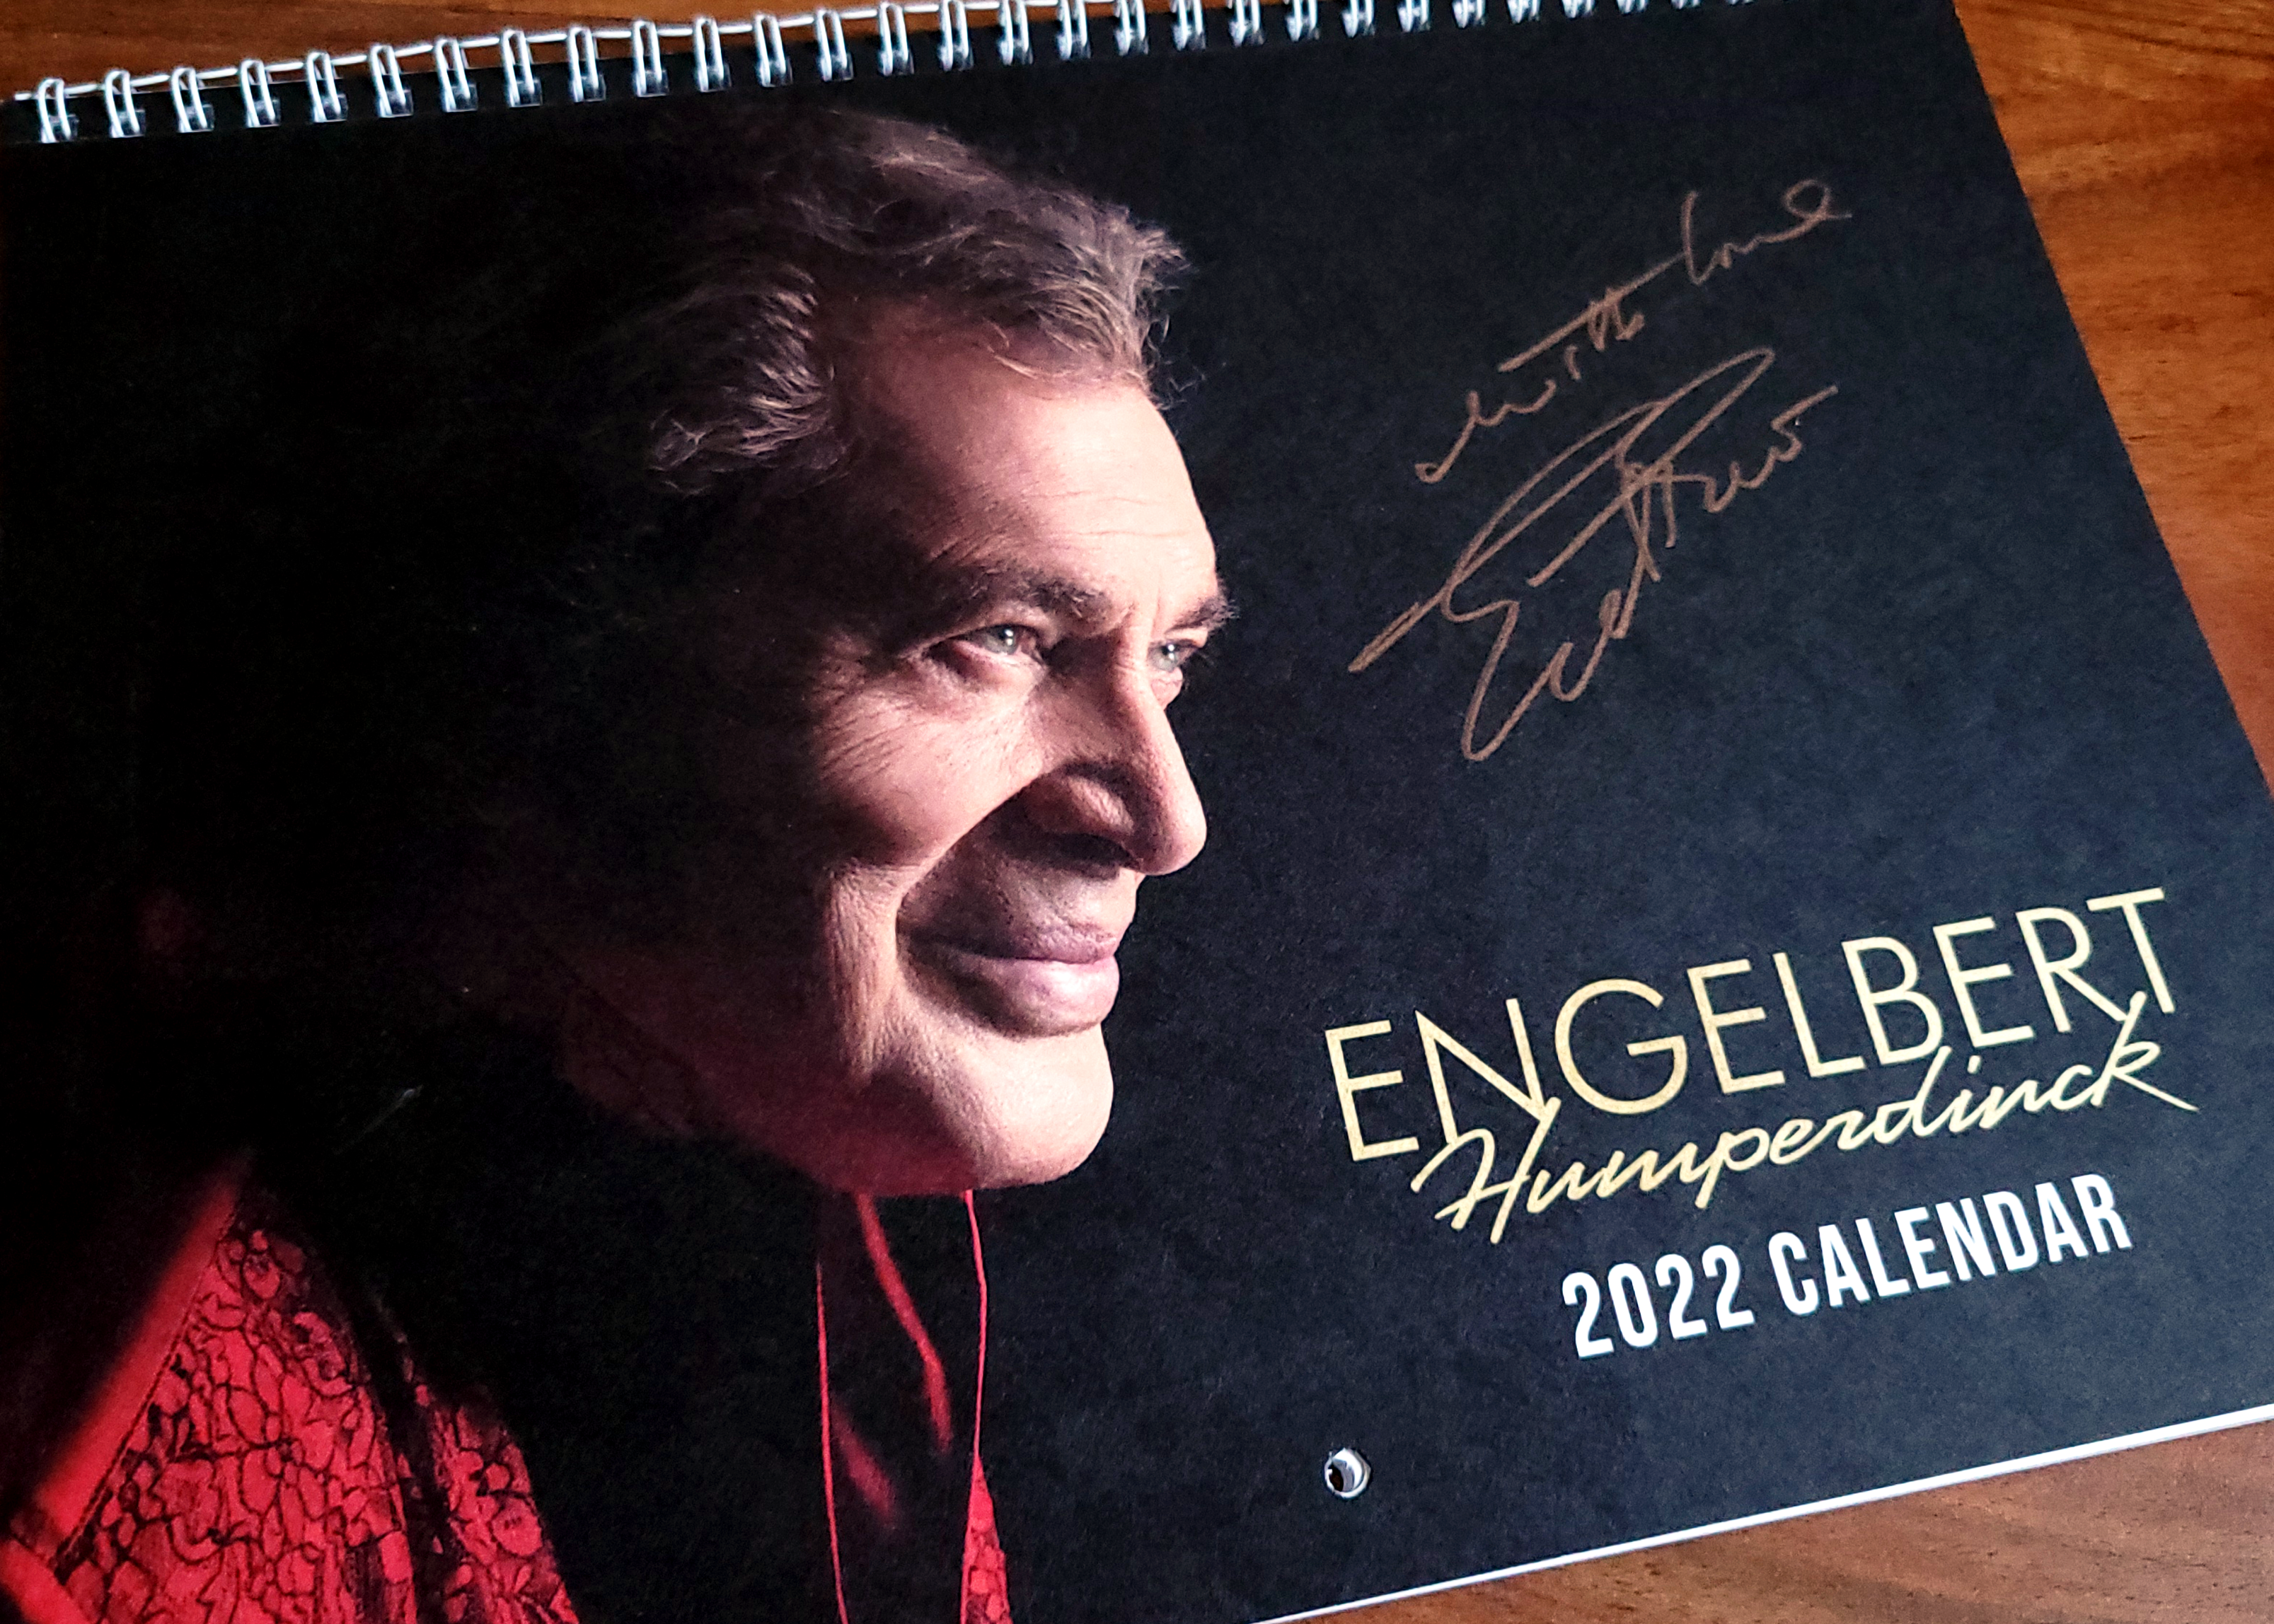 Autographed Engelbert Humperdinck 2022 Wall Calendars are Now Available!